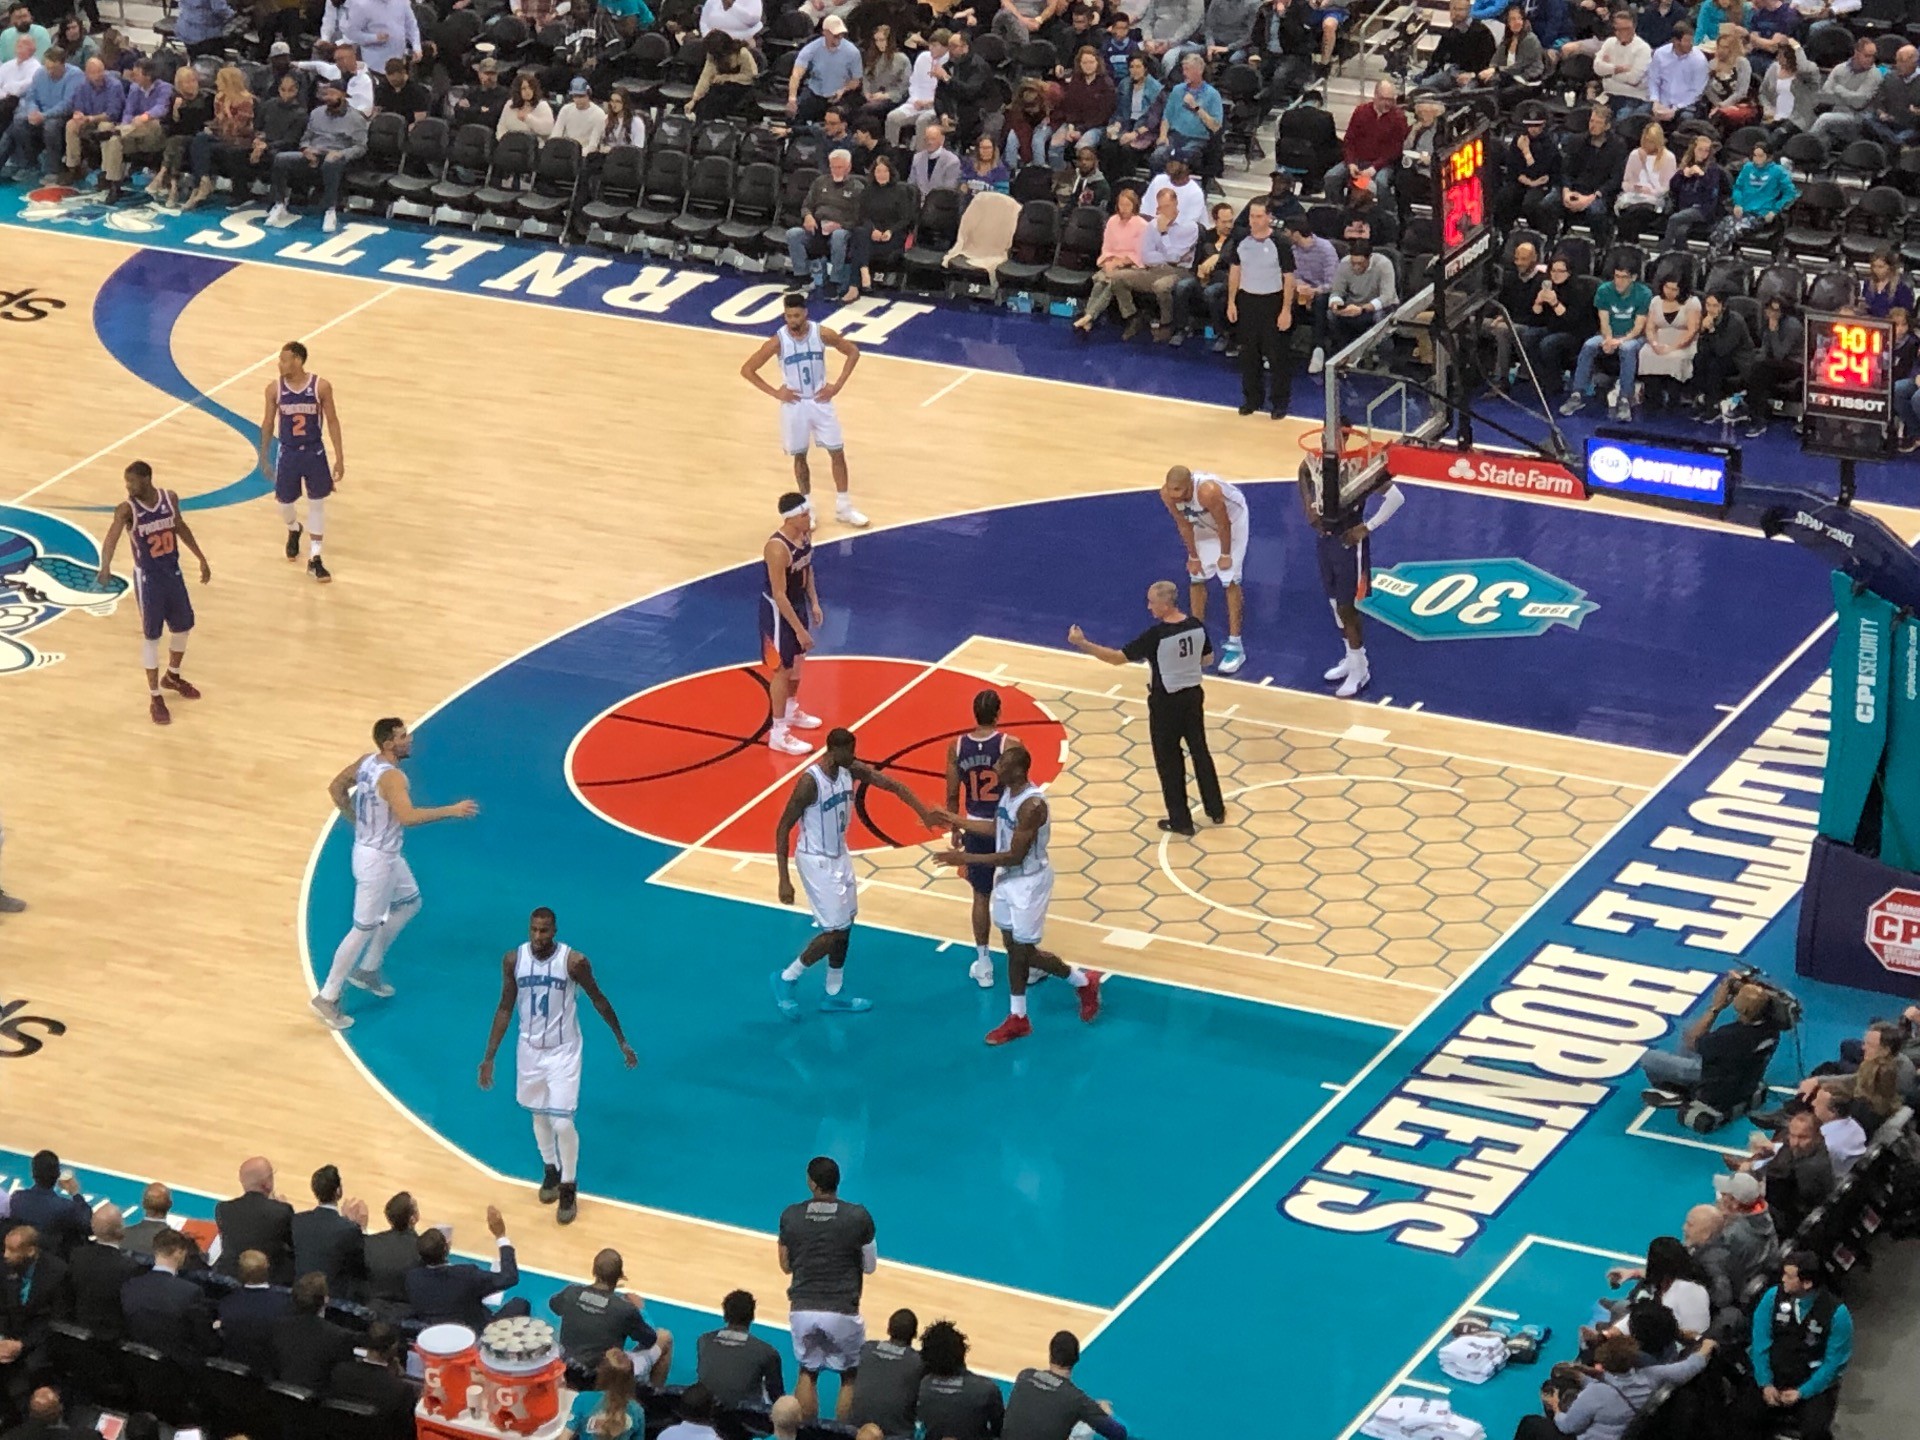 1920x1440 Spectrum Center, section 205, row A, seat 18 - Charlotte Hornets vs Phoenix  Suns, Shared Anonymously